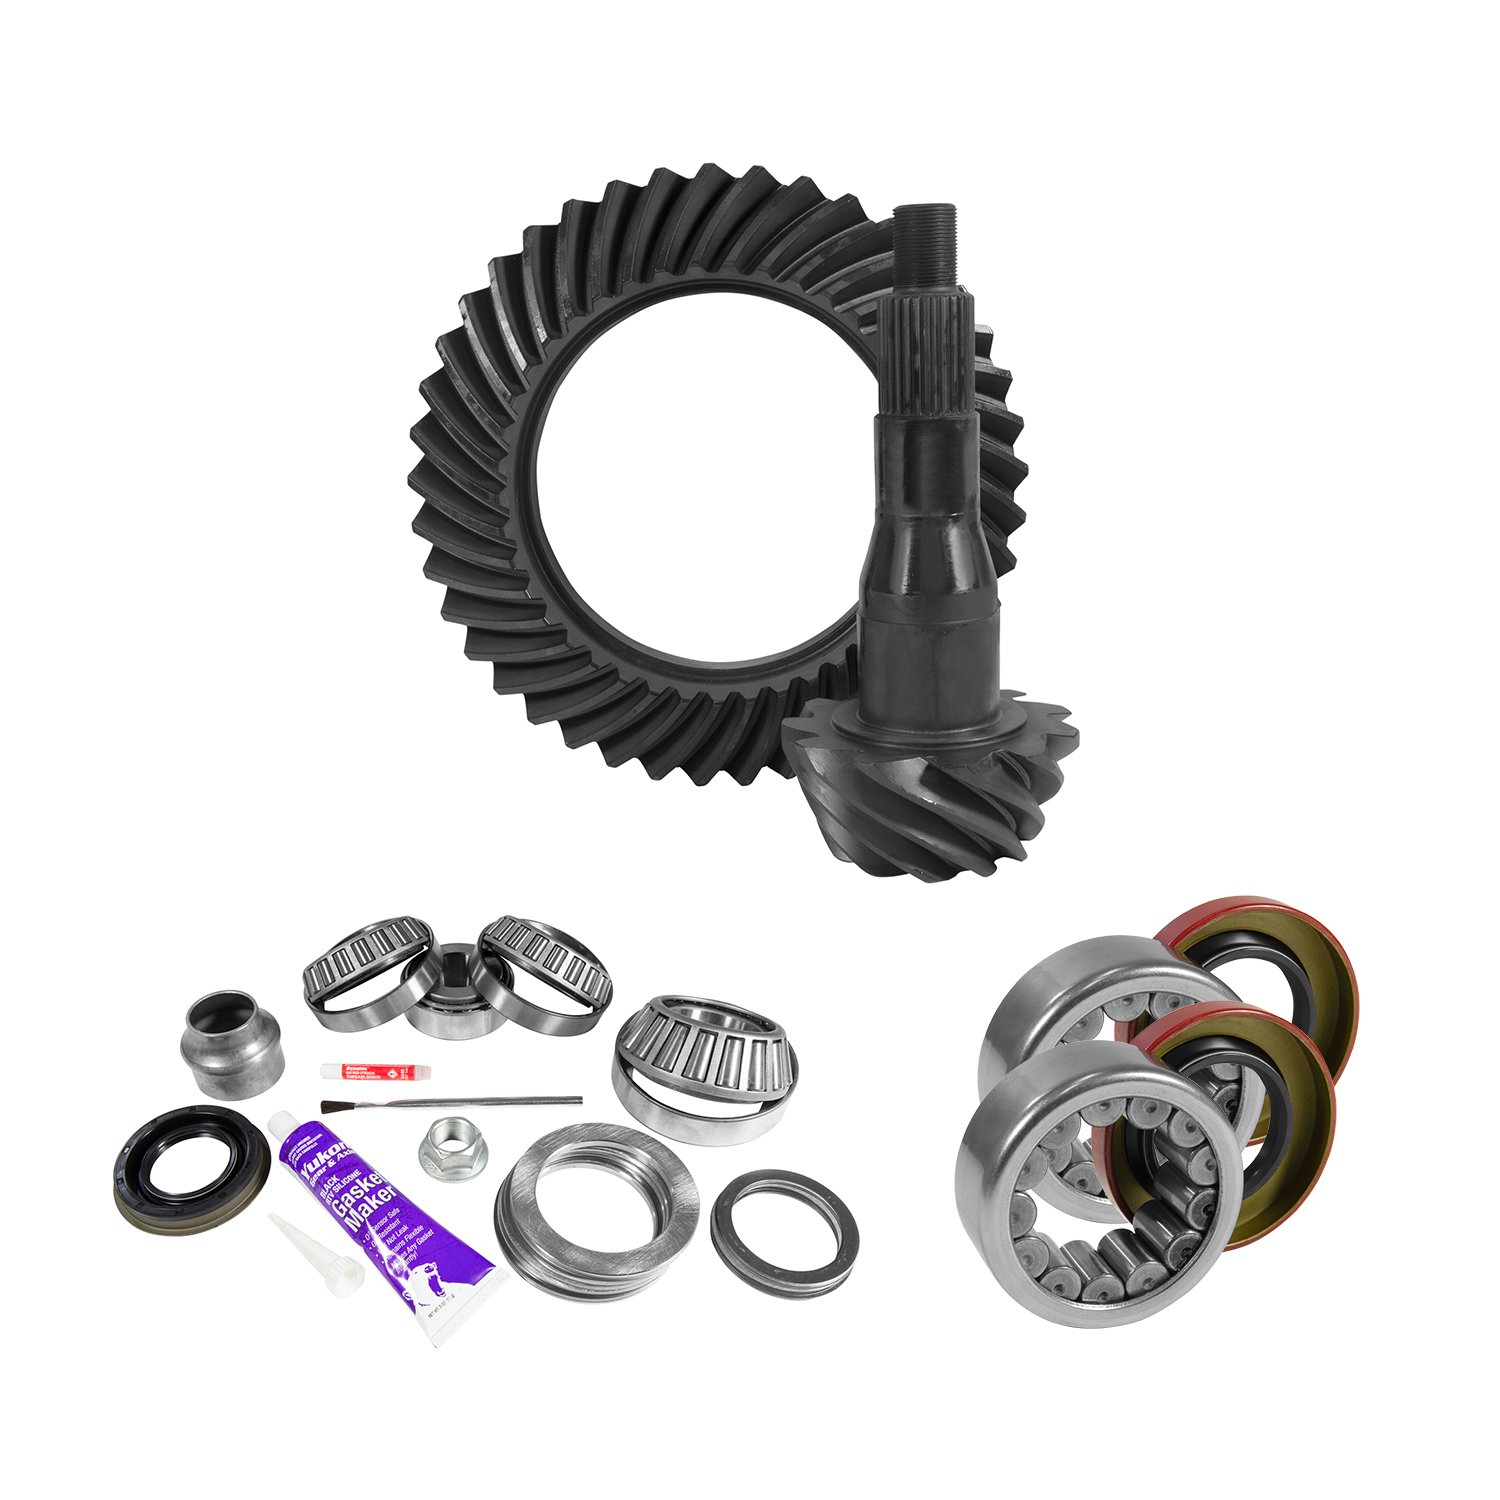 USA Standard 10814 9.75 in. Ford 3.73 Rear Ring & Pinion Install Kit, Axle Bearings & Seal